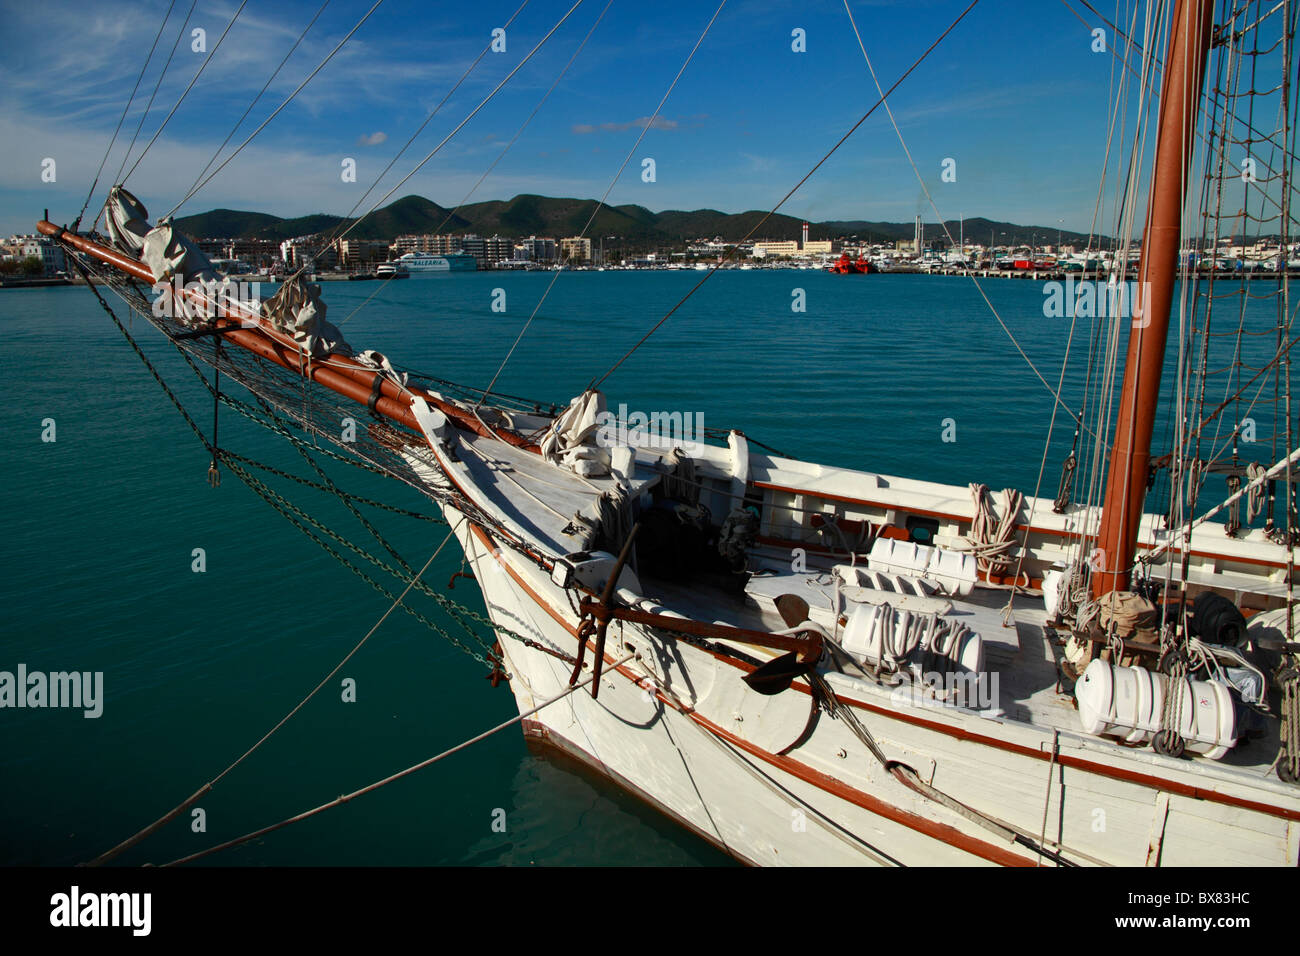 Partial view of a shooner moored at the harbor of Ibiza, Spain Stock Photo